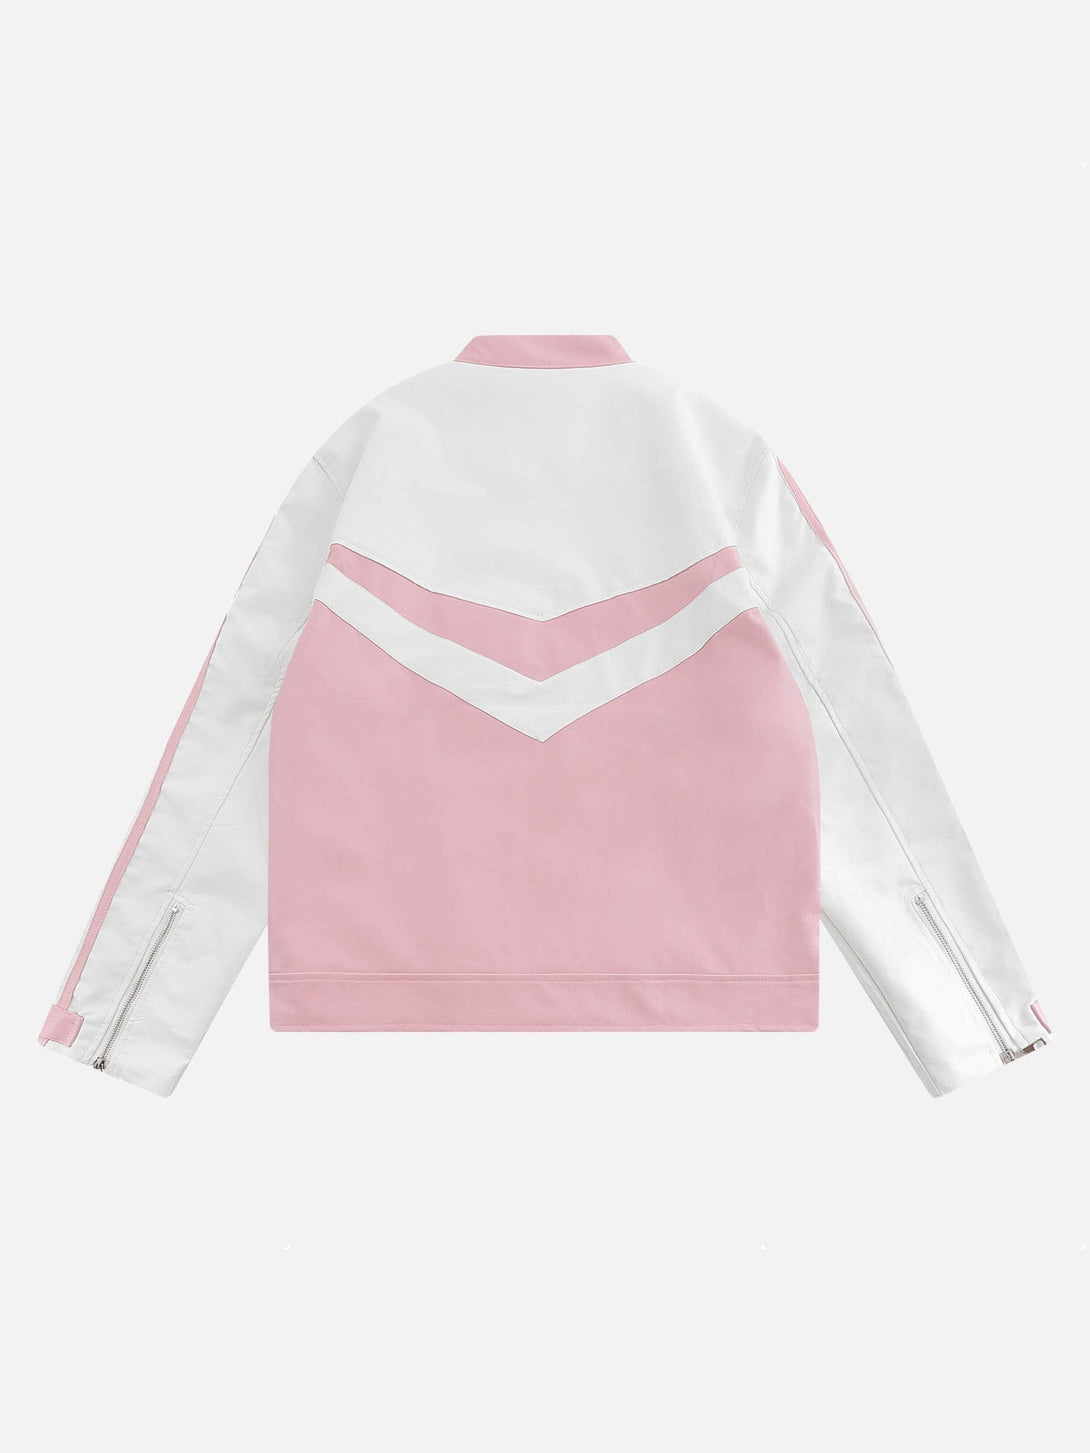 Majesda® - American Embroidered Colorblocked Leather Jacket- Outfit Ideas - Streetwear Fashion - majesda.com